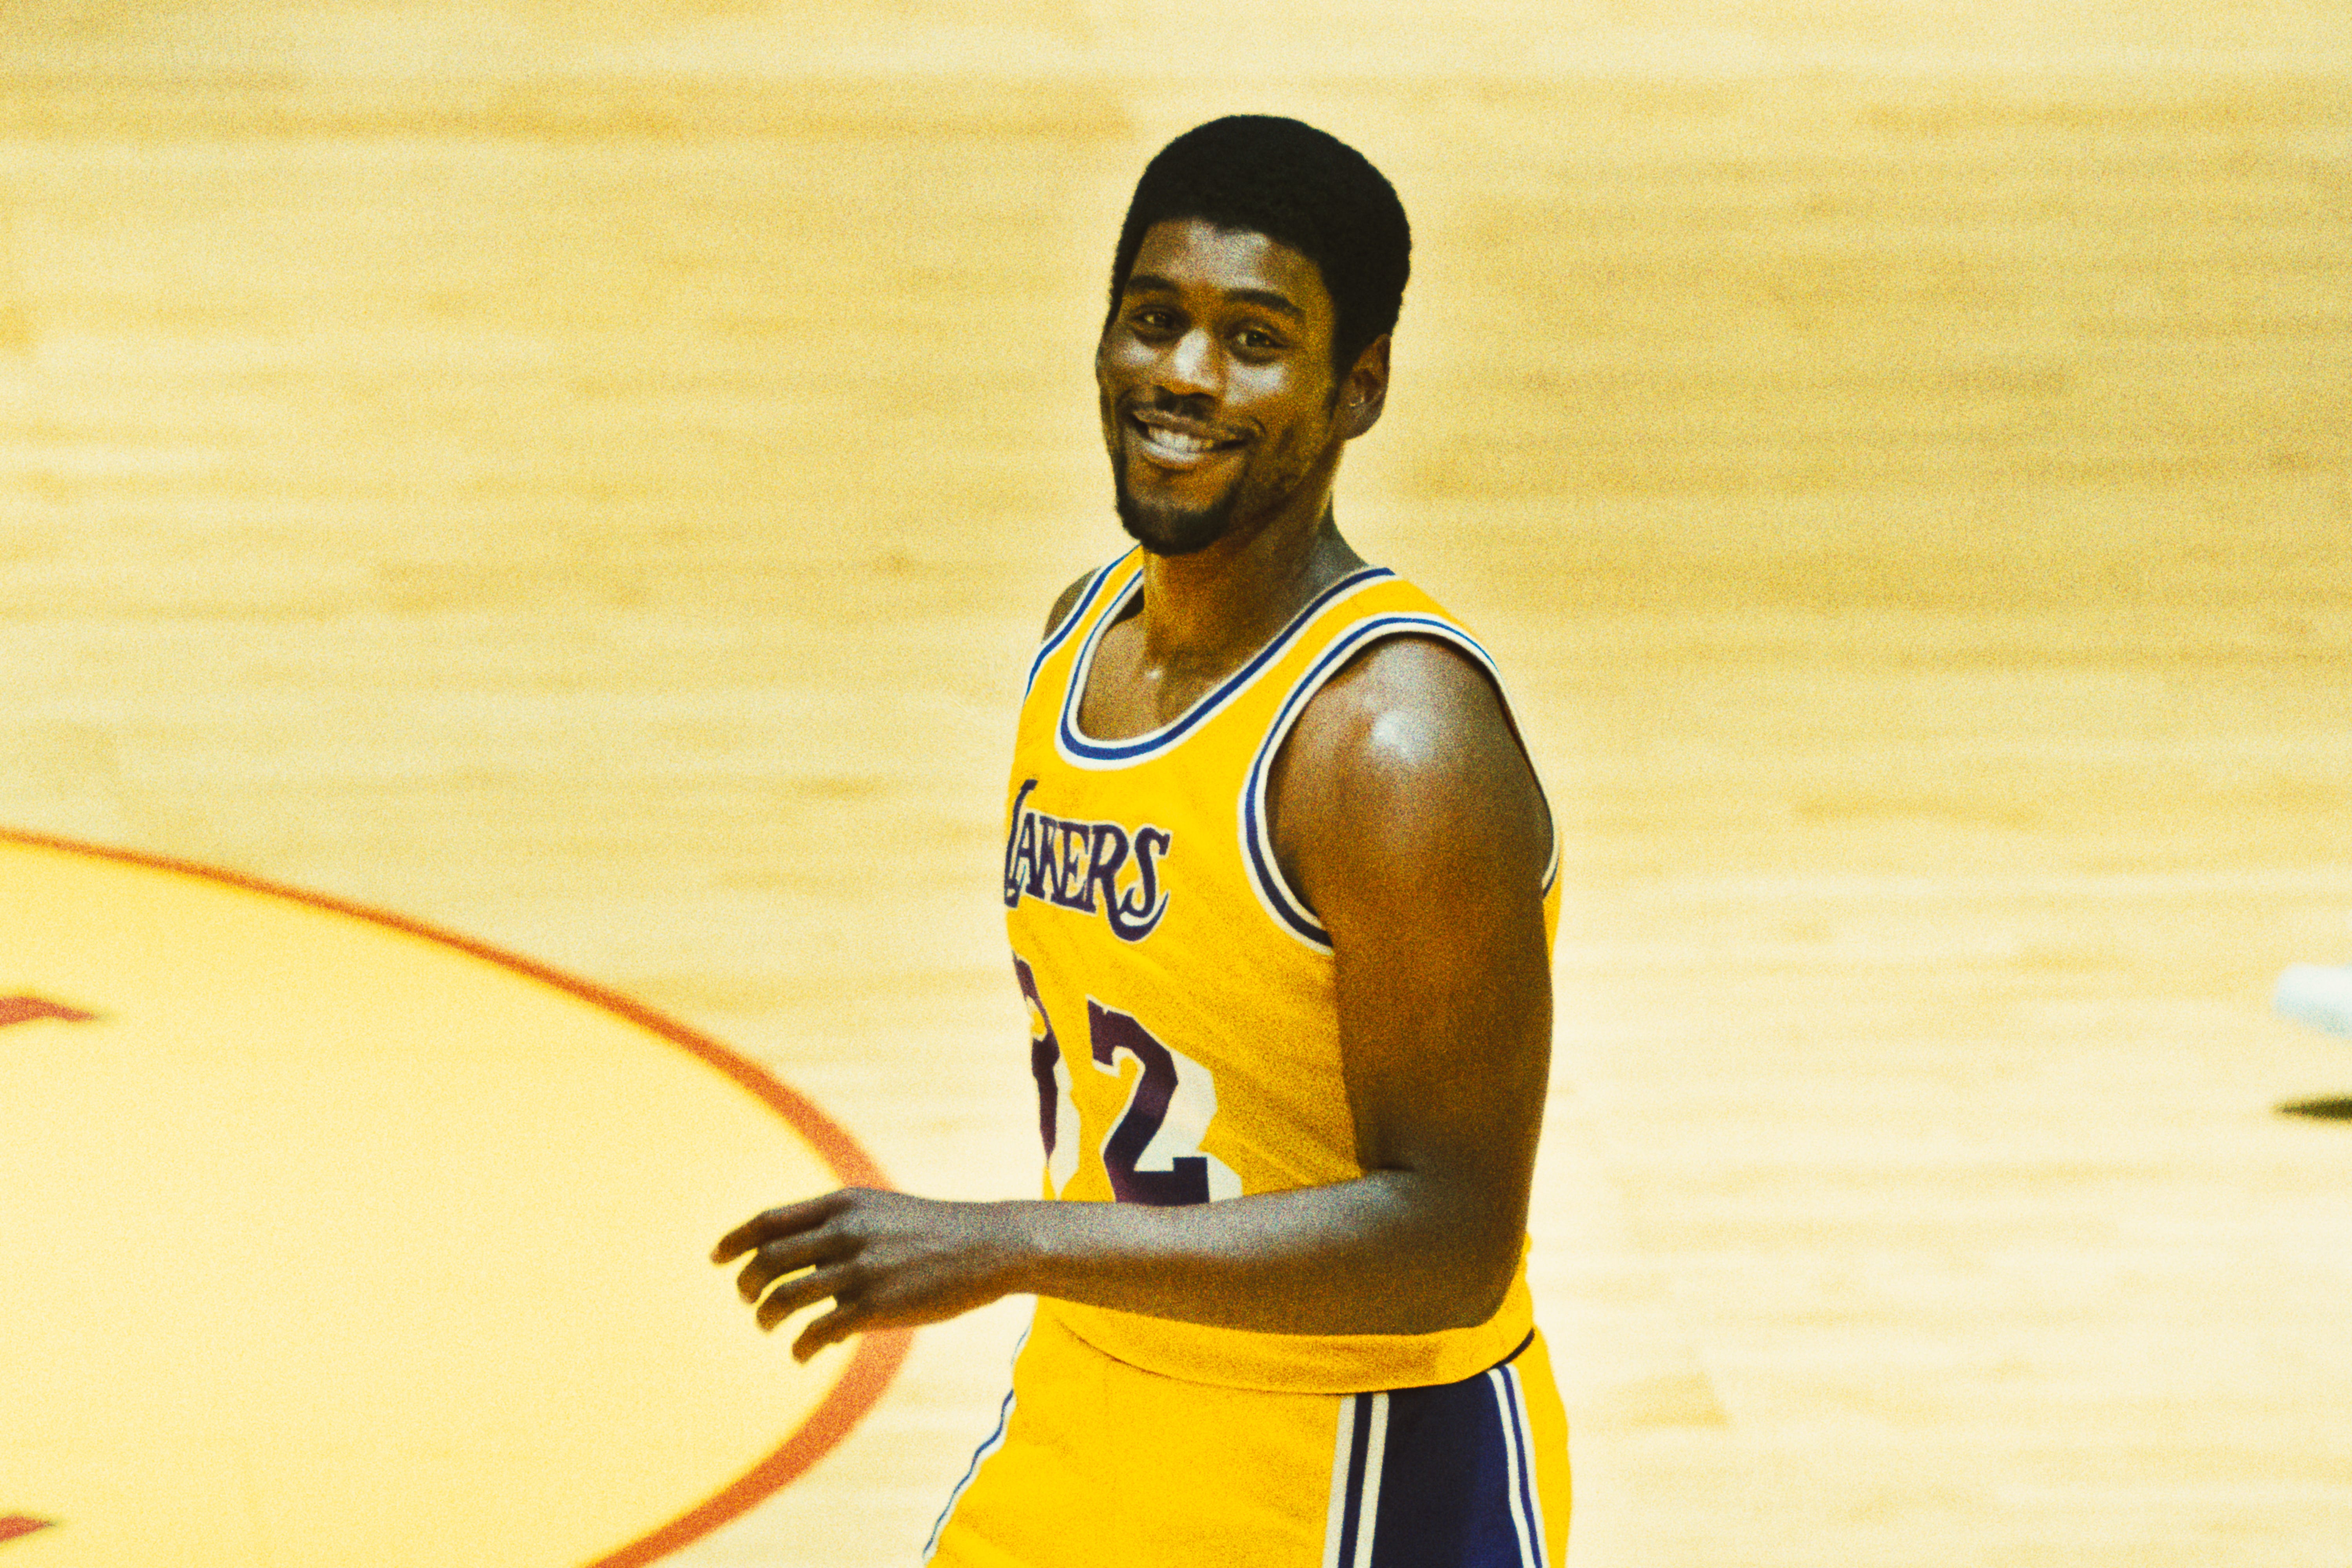 Winning Time' gets heart of Magic Johnson's Showtime Lakers